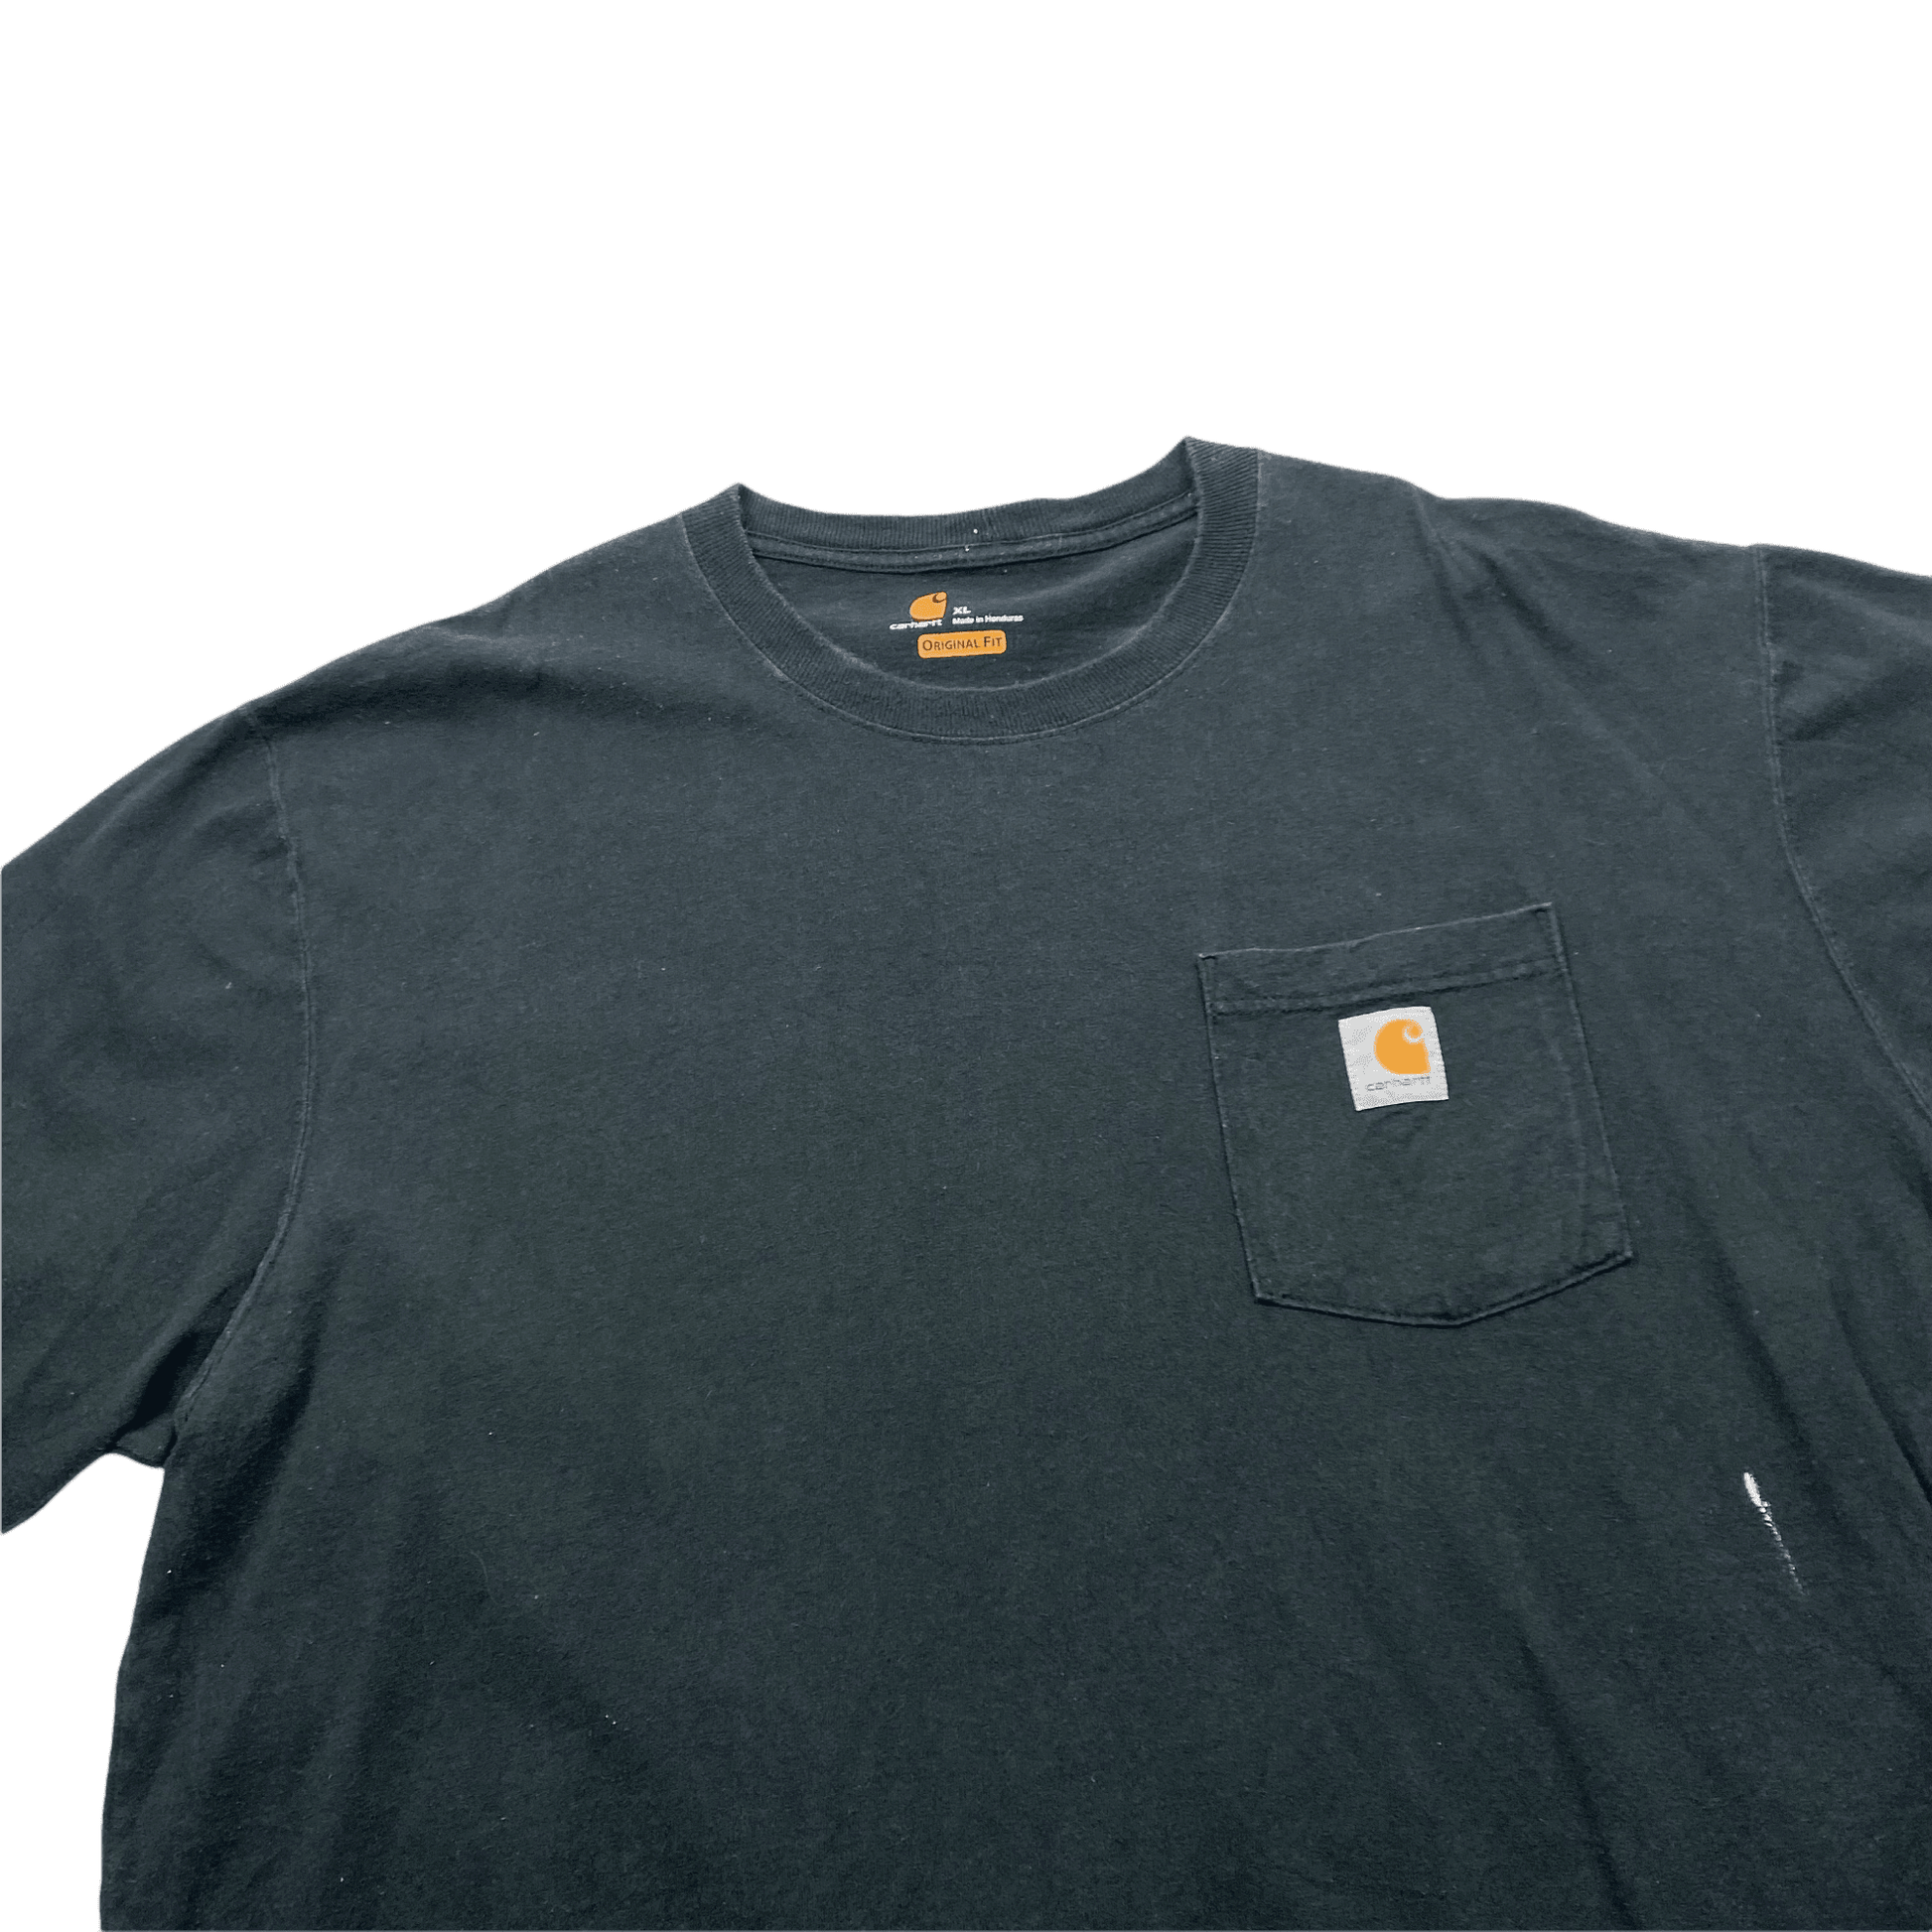 Vintage 90s Grey Carhartt Spell-Out Tee - Extra Large - The Streetwear Studio